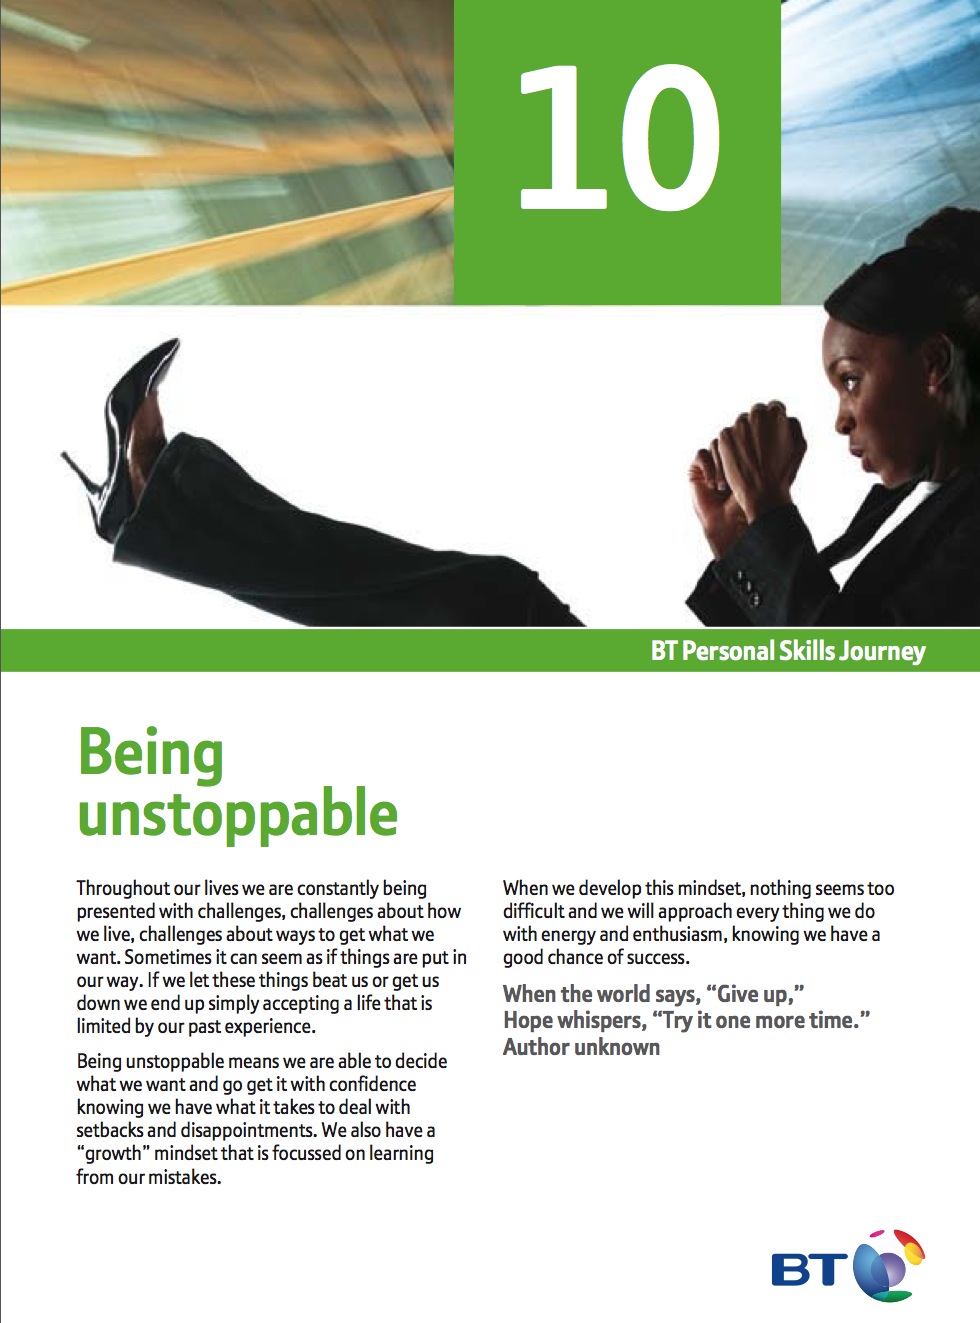 BT Personal Skills Journey: Being unstoppable | Recurso educativo 39331